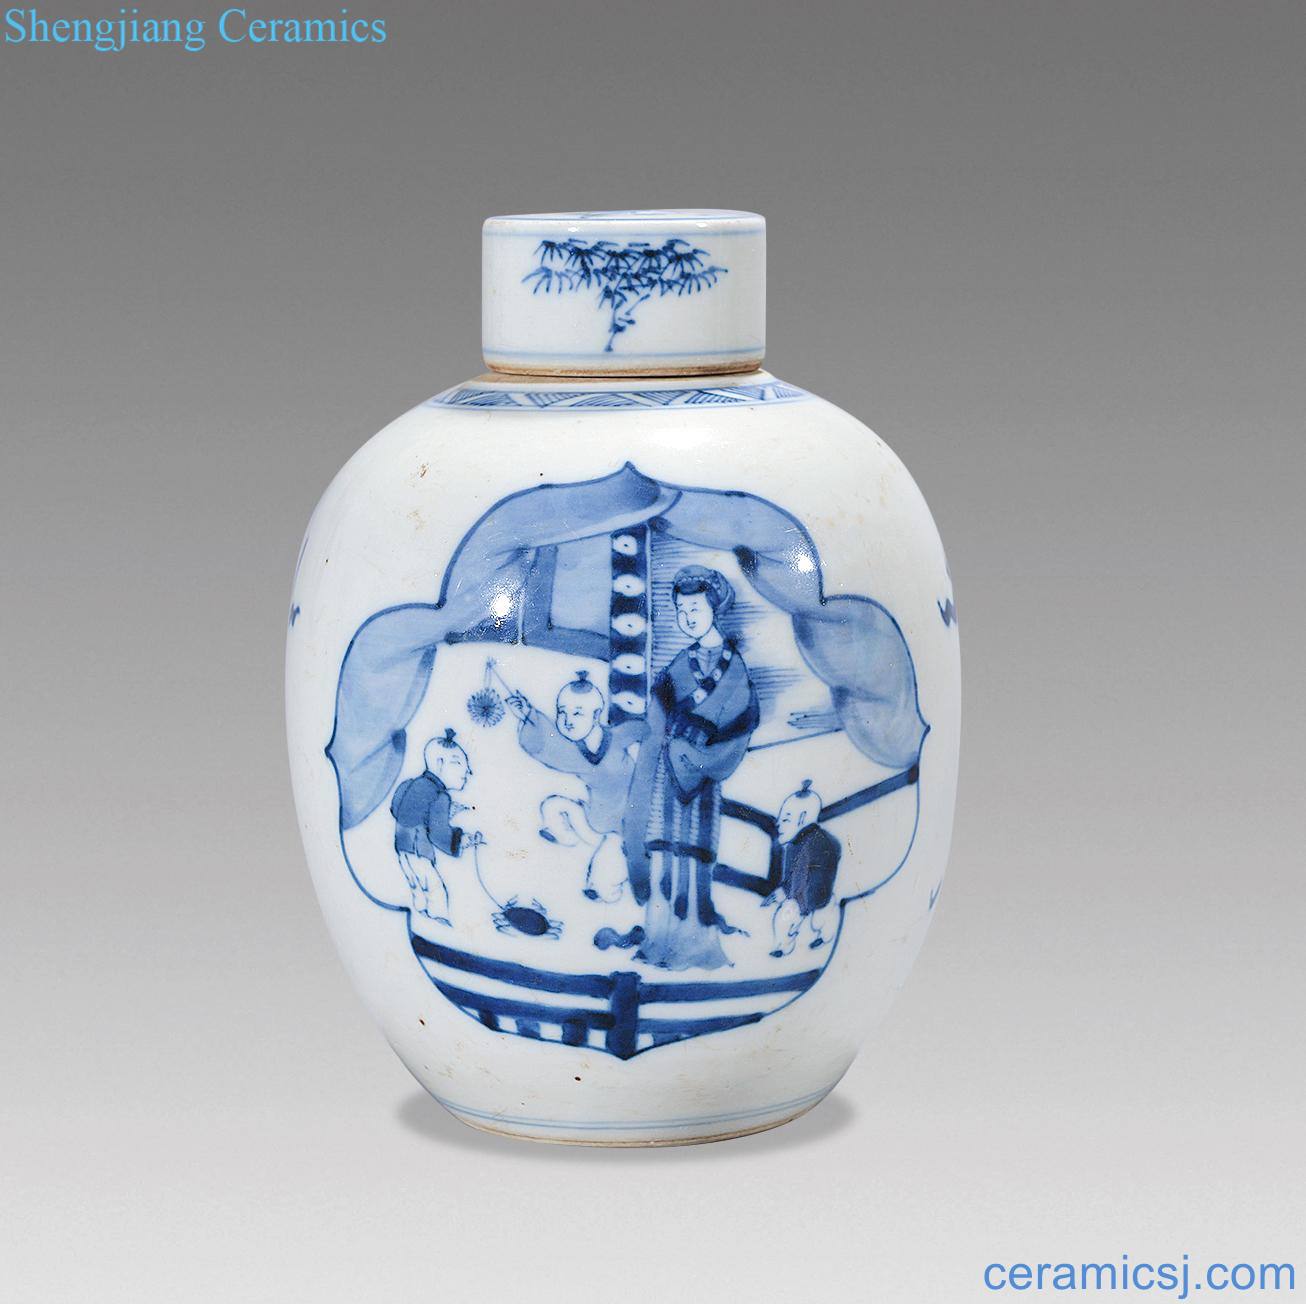 Qing porcelain medallion characters cover tank